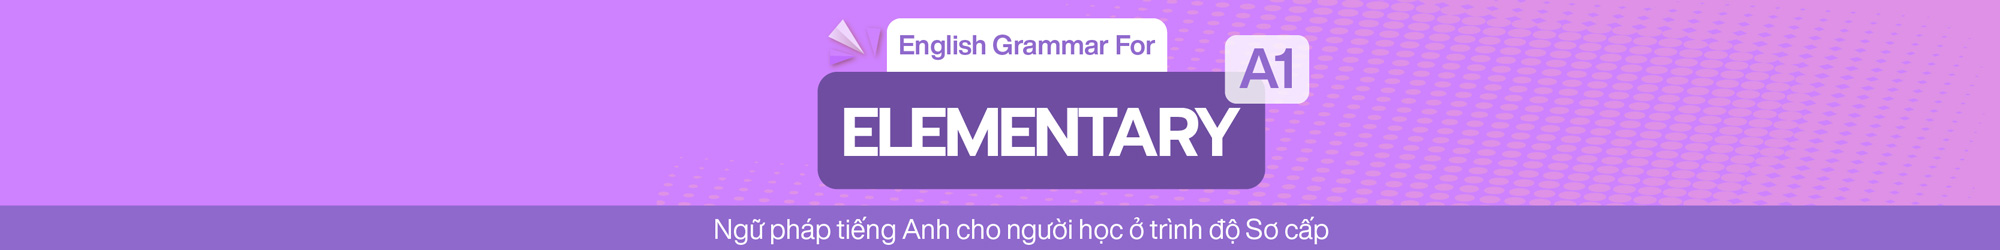 ENGLISH GRAMMAR FOR ELEMENTARY (A1) banner